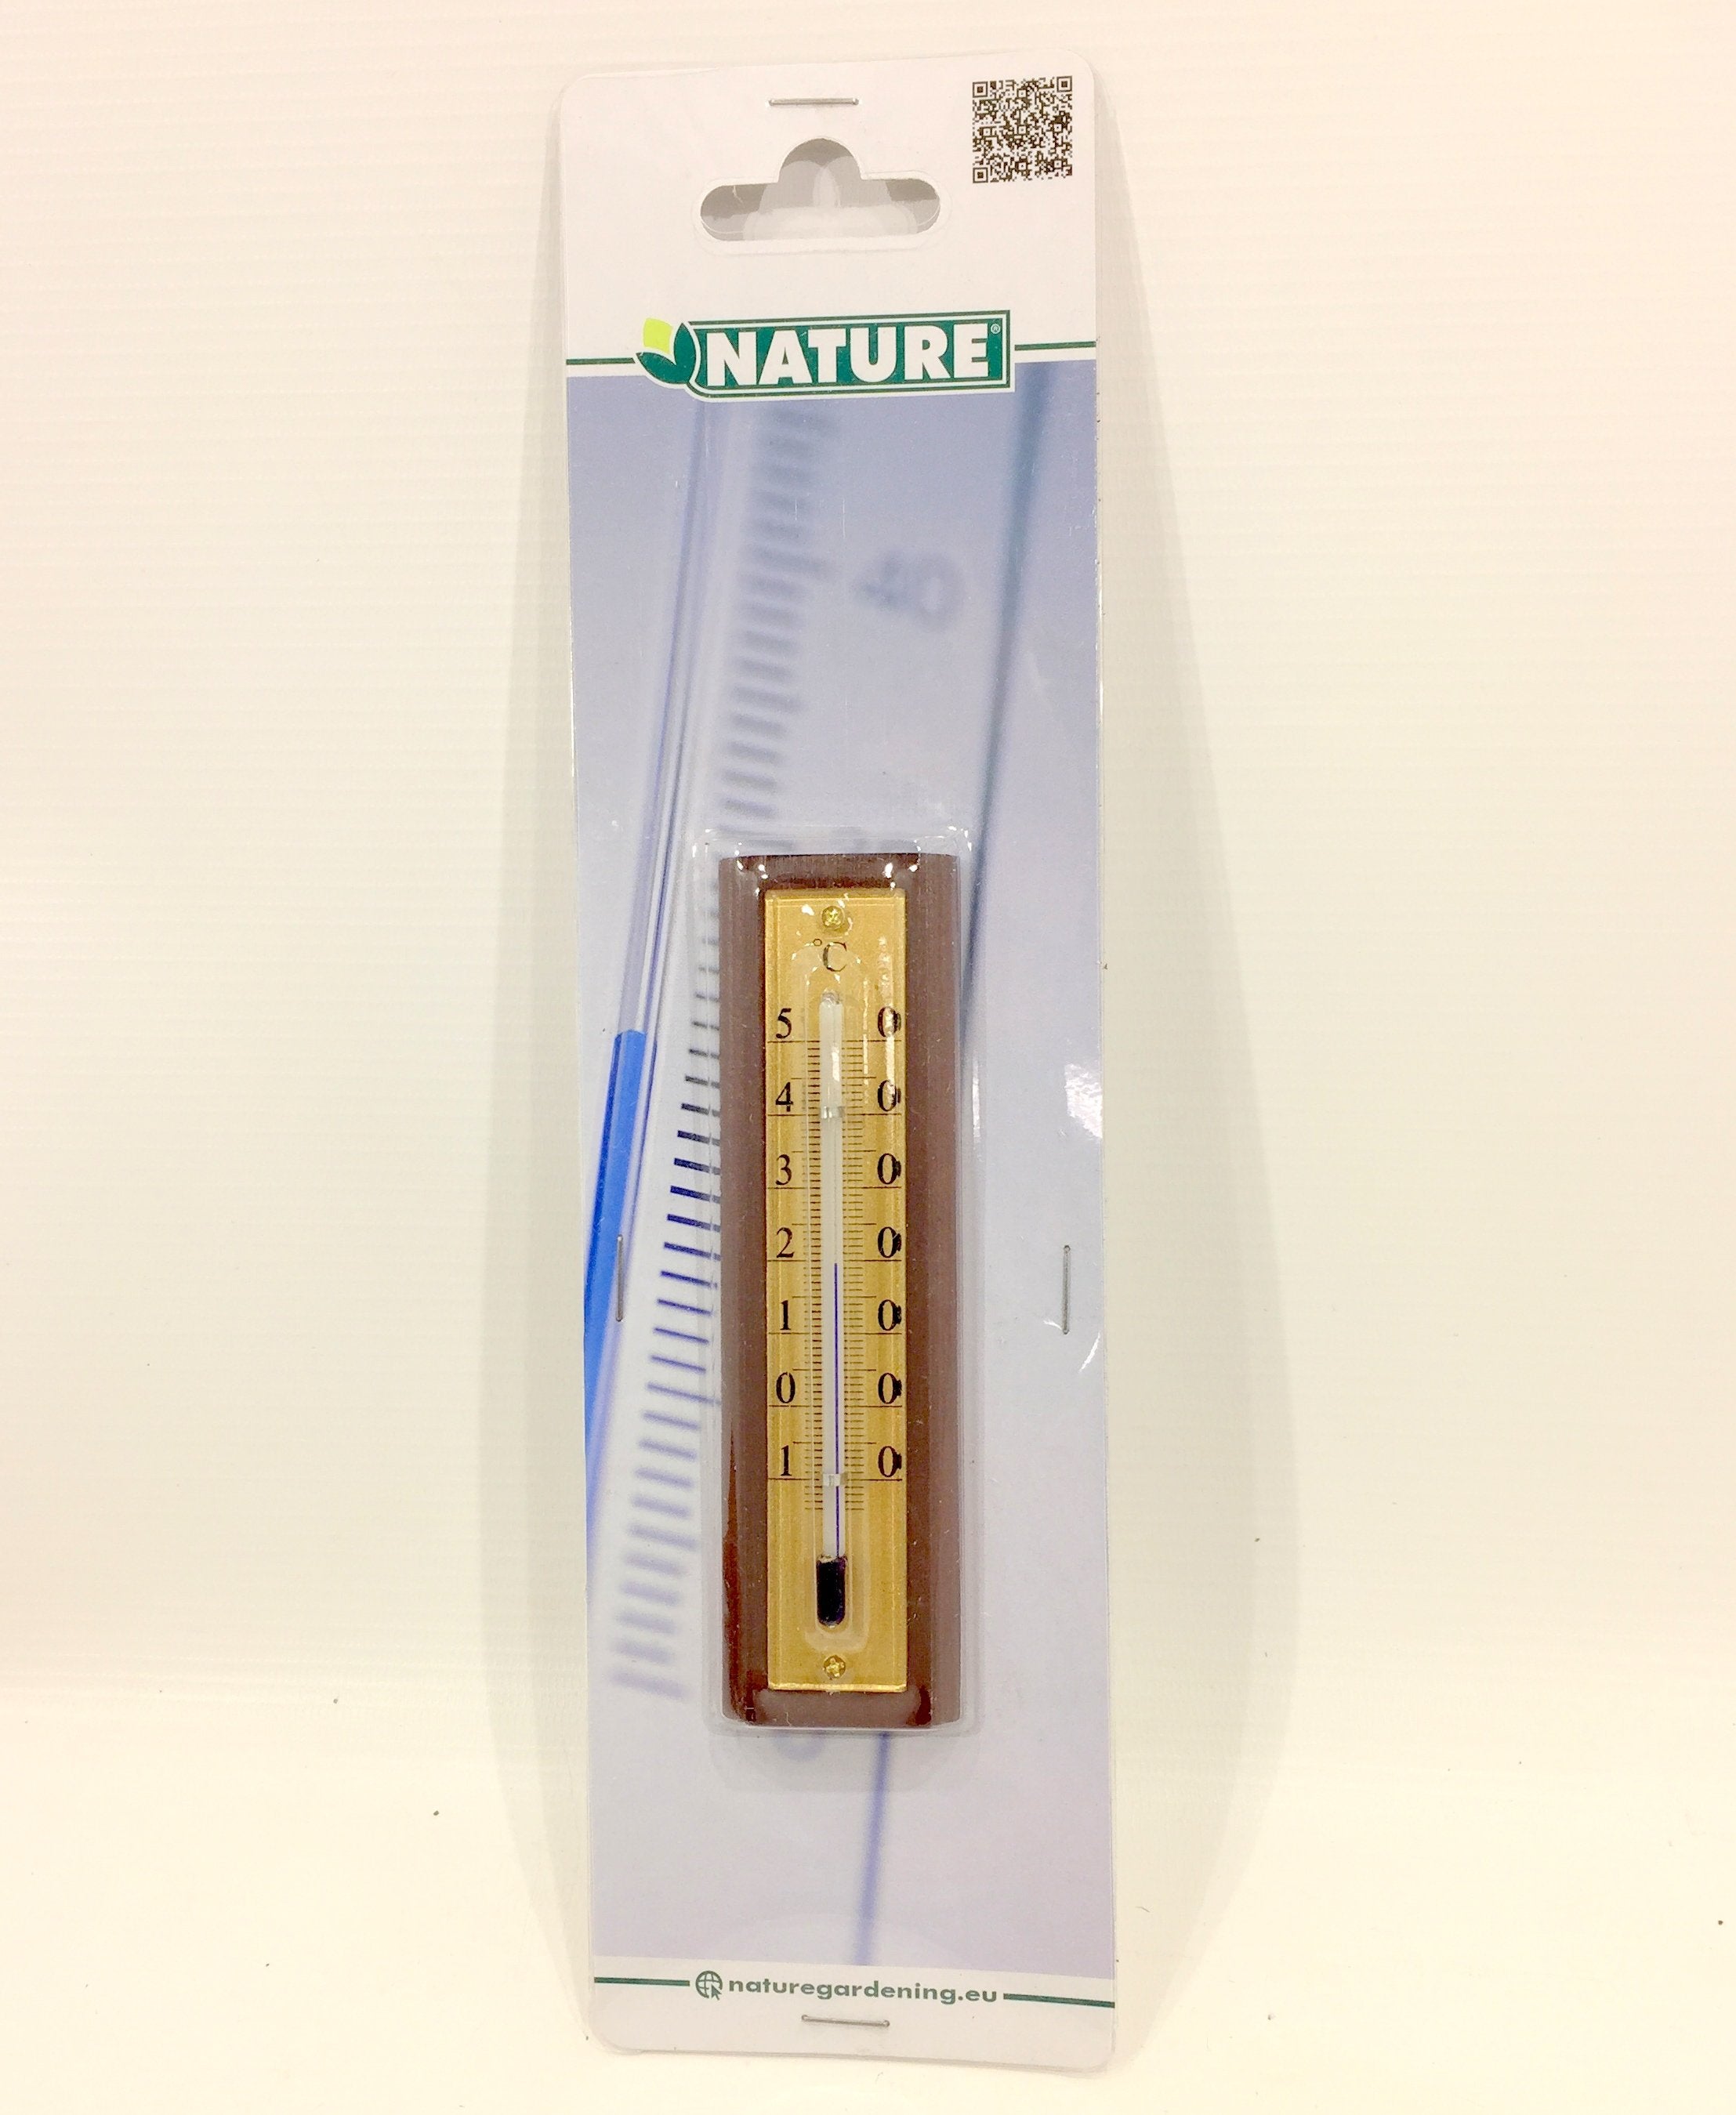 Wall thermometer 12.5 x 3.5 x 1.5cm